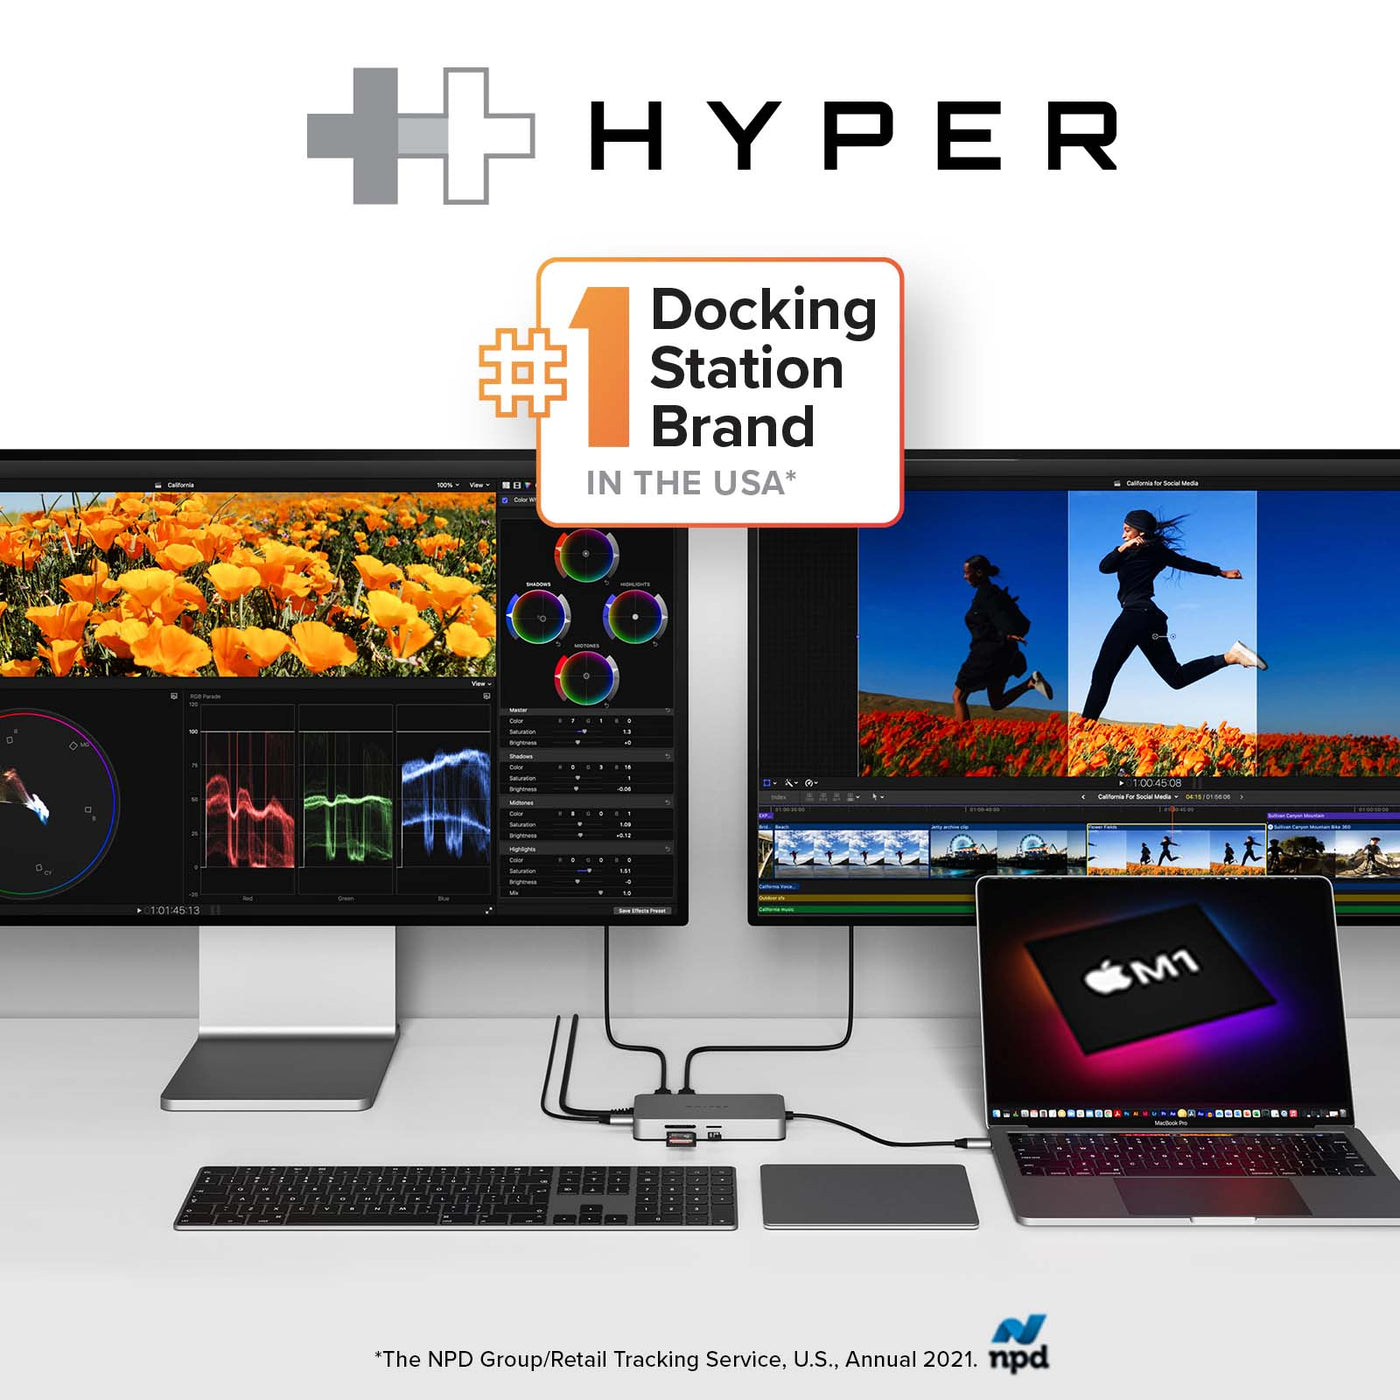 HYPER Named #1 Docking Station Brand in the U.S.A.